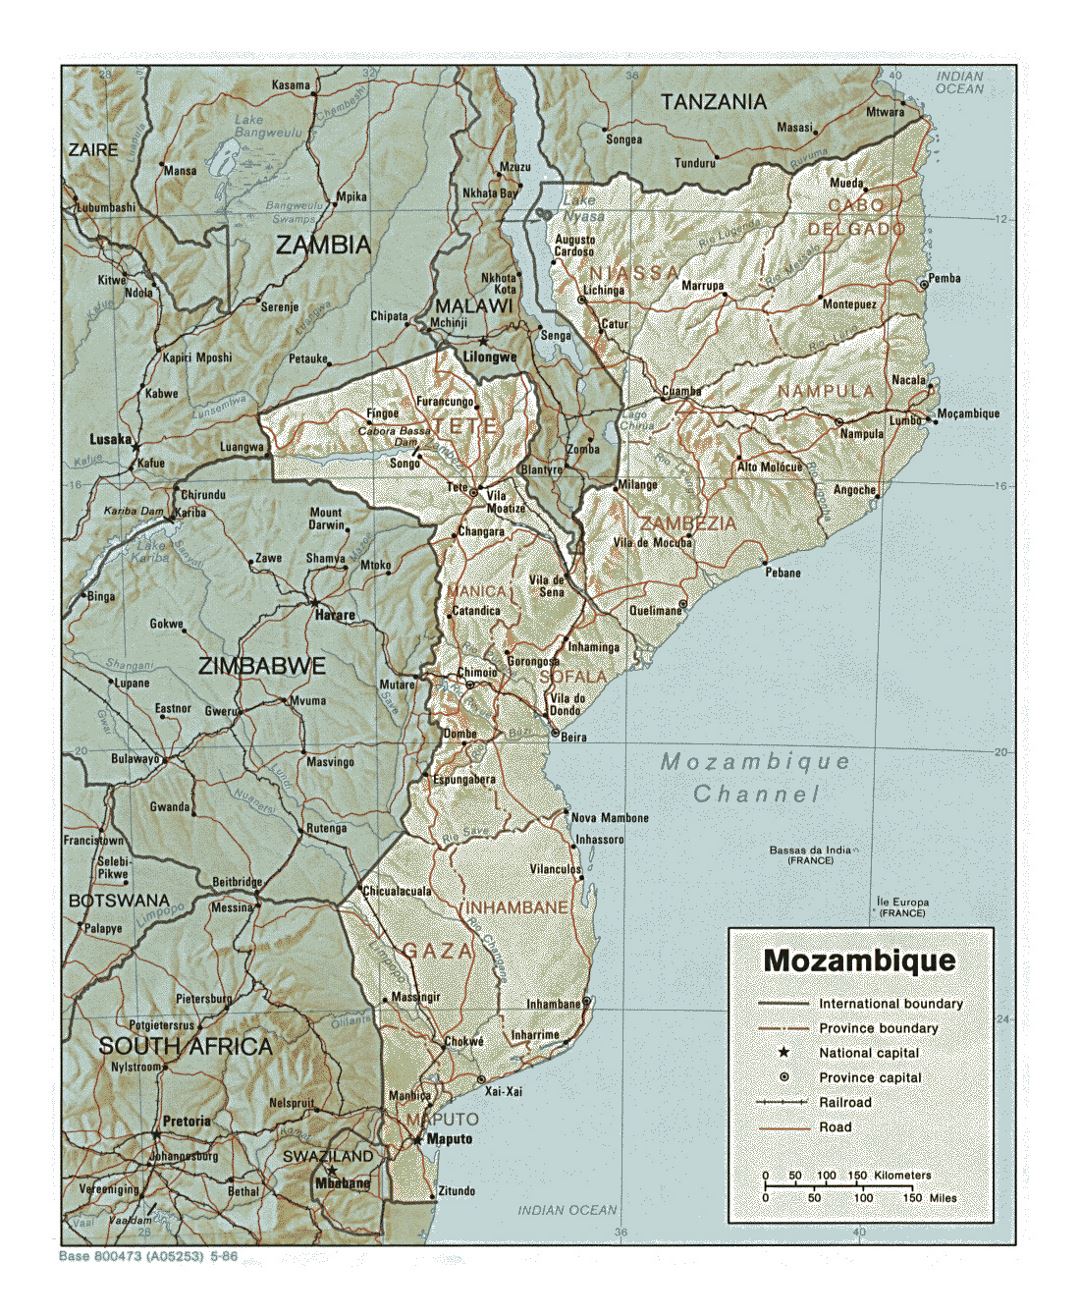 Detailed political and administrative map of Mozambique with relief, roads, railroads and major cities - 1986